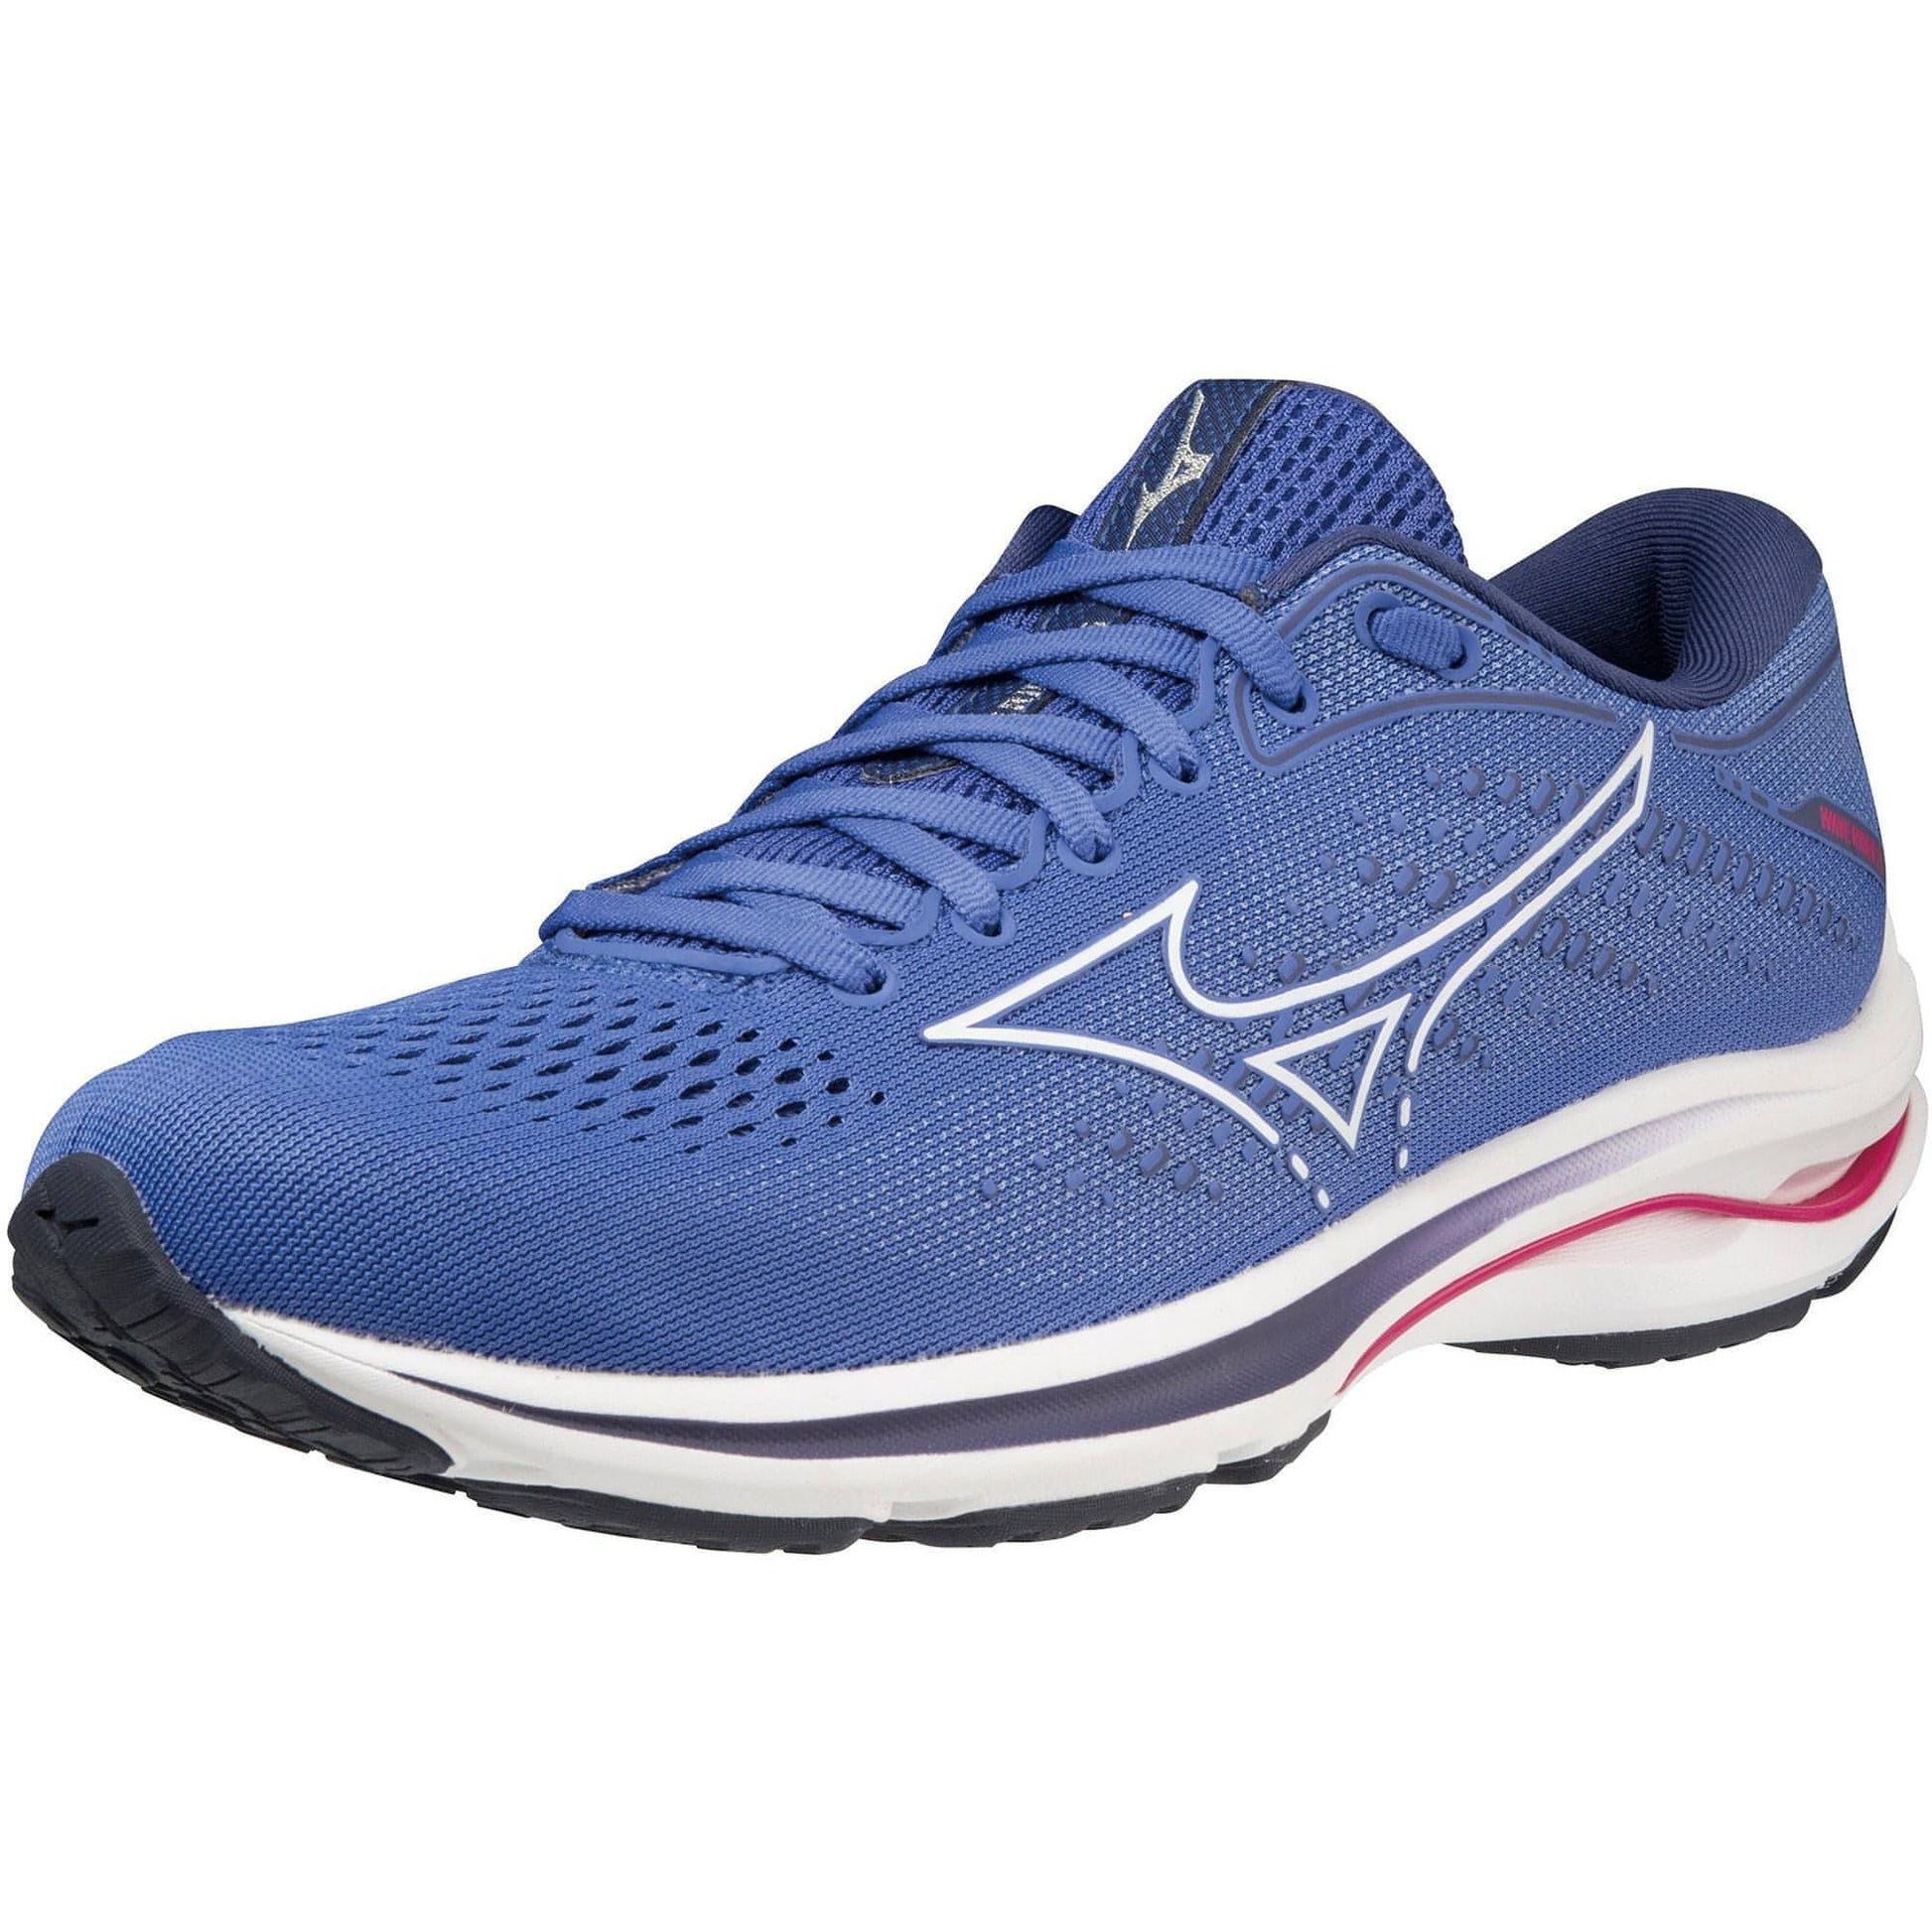 Mizuno Wave Rider J1Gd2103 Front - Front View